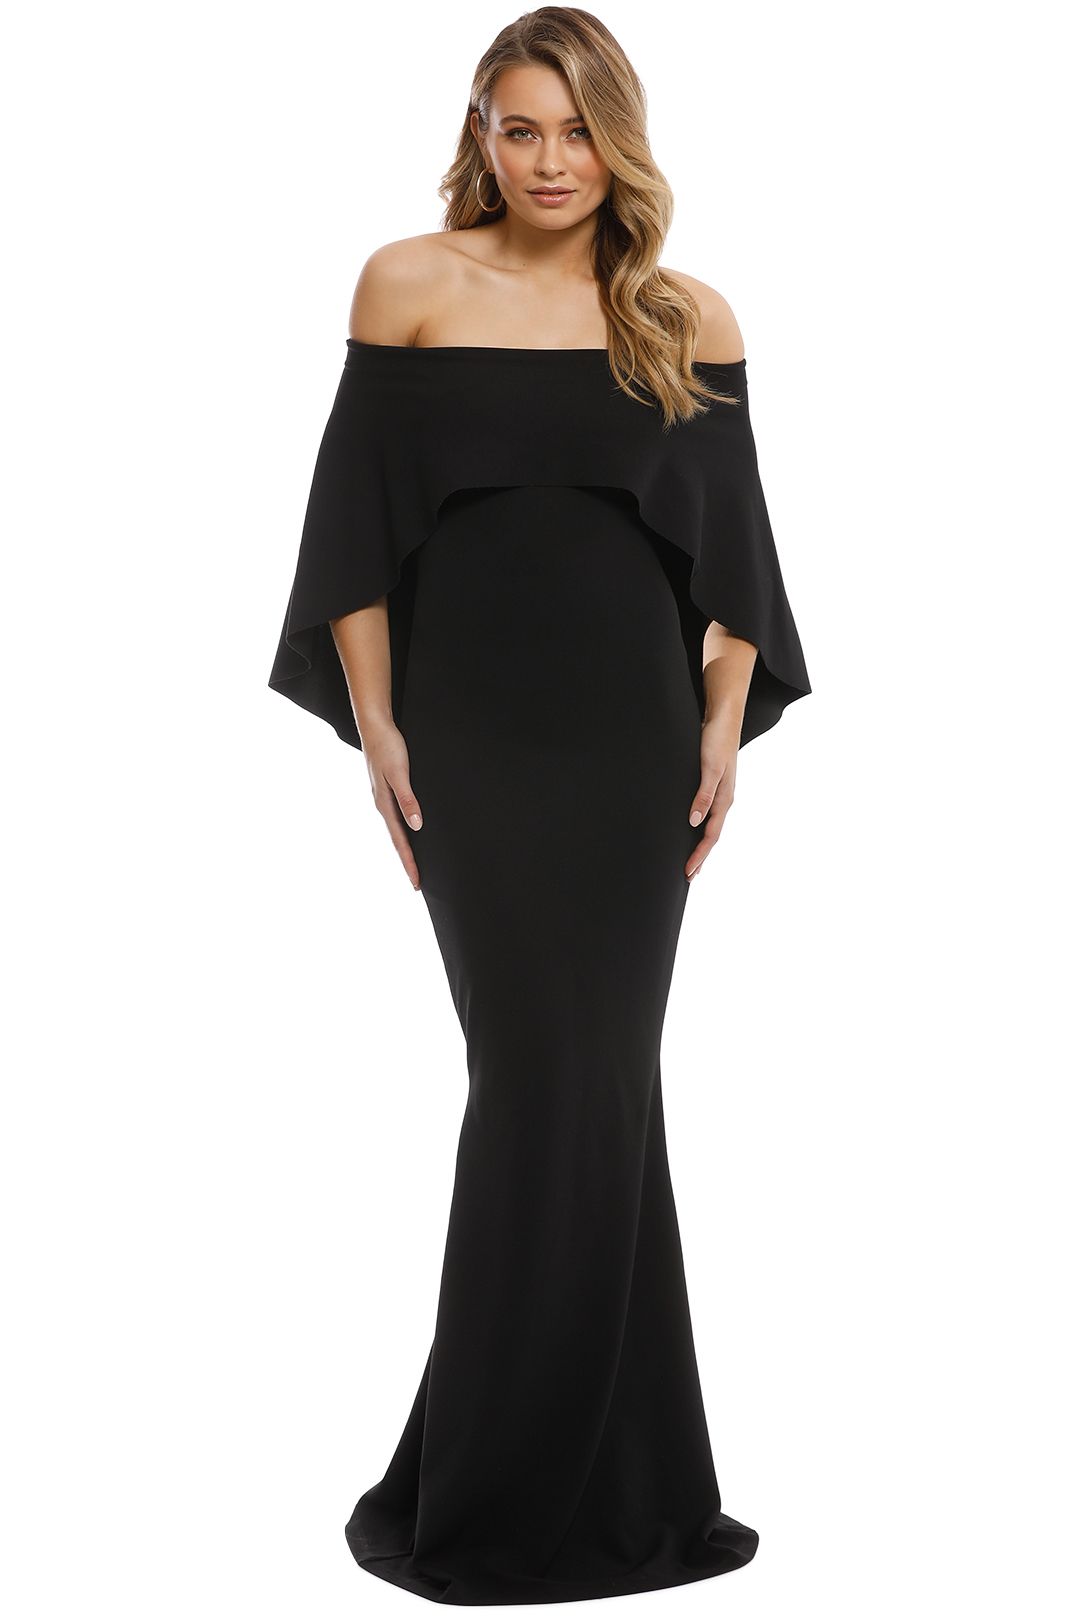 Composure Gown in Black by Pasduchas for Rent